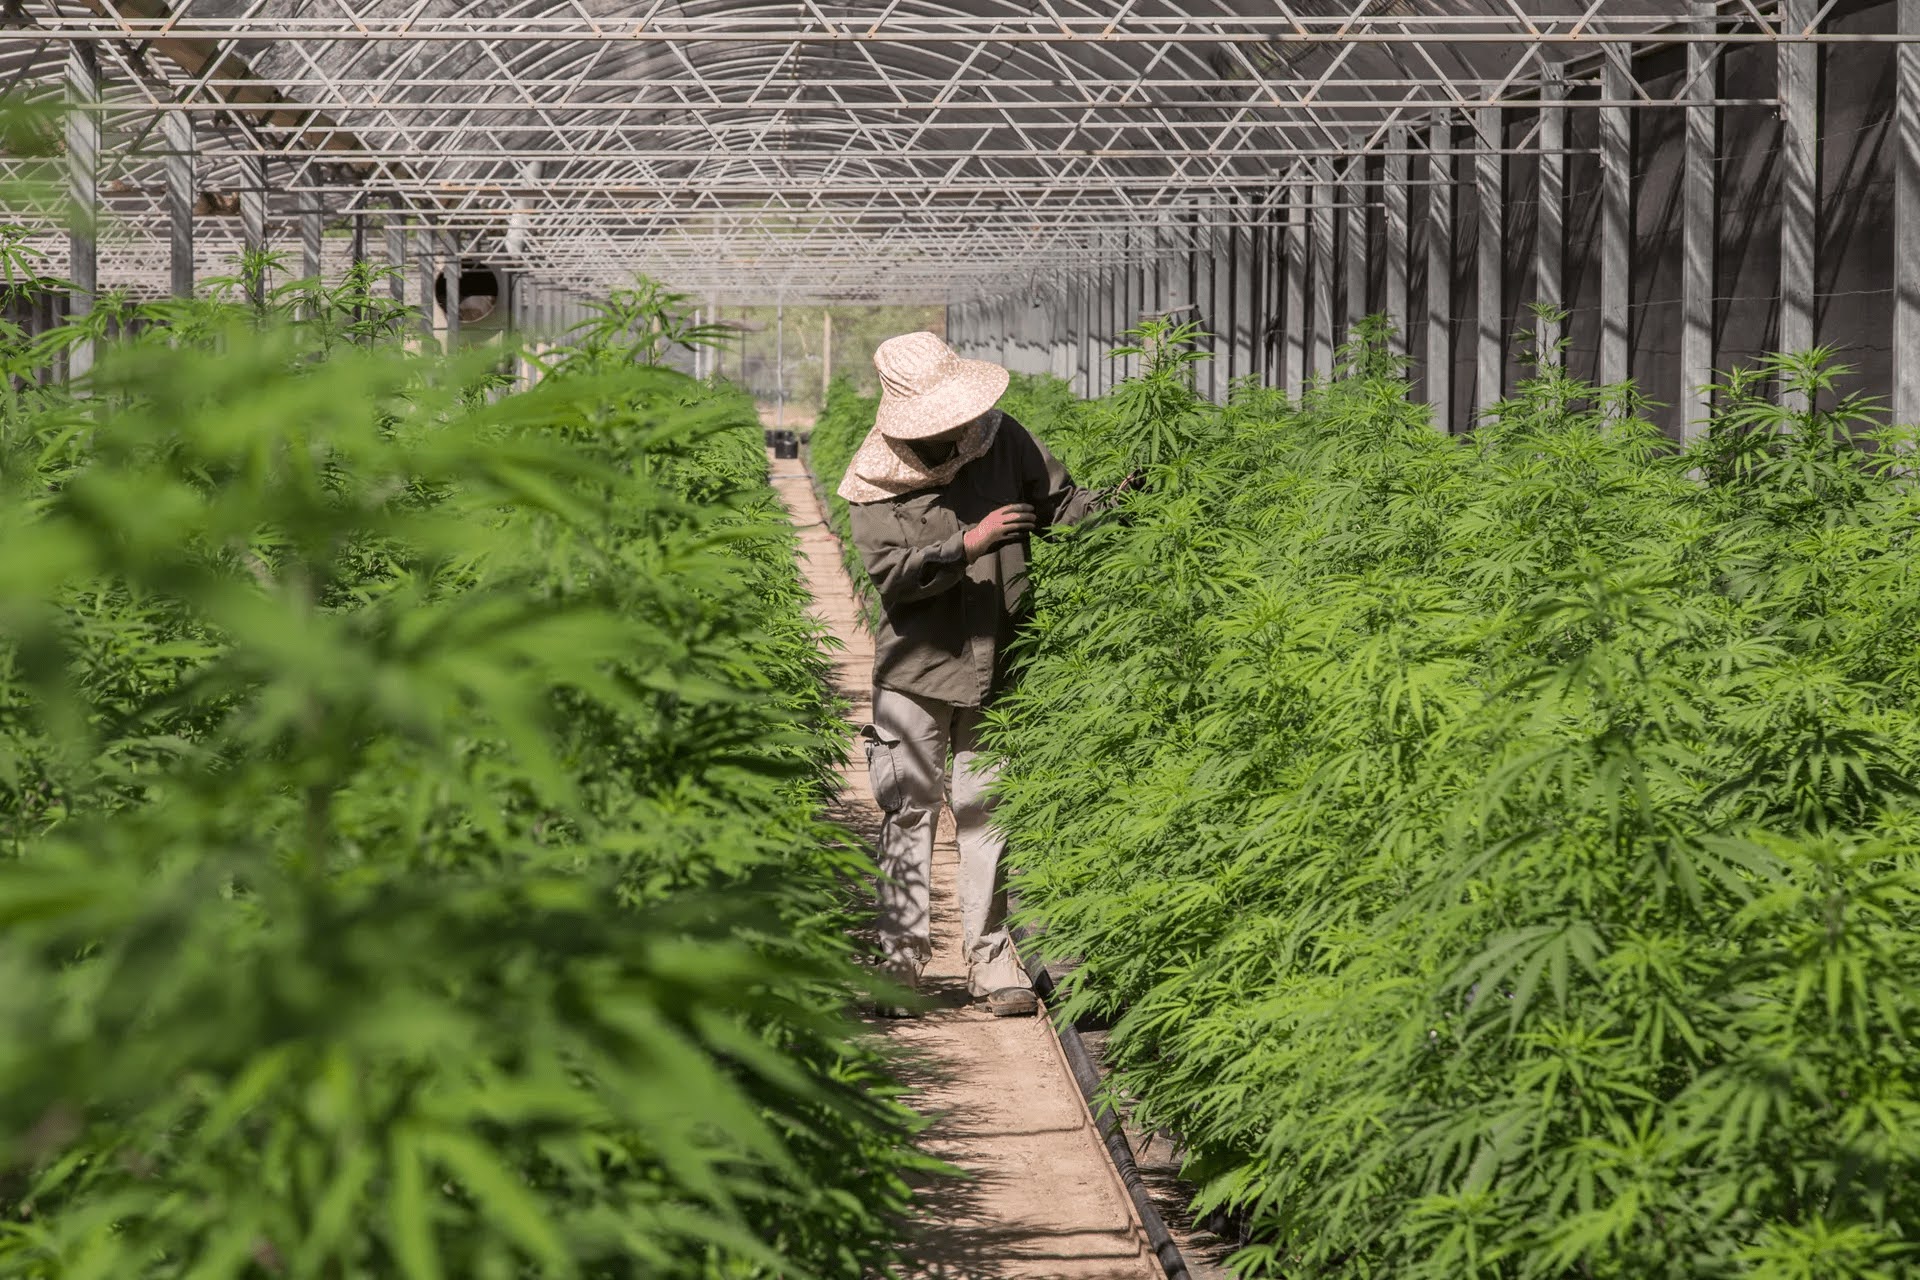 <p>A worker at Agrogenética Riojana, a state-owned company that produces medical cannabis in Argentina&#8217;s Cuyo region, examining cannabis sativa plants (Image: Agrogenética Riojana)</p>